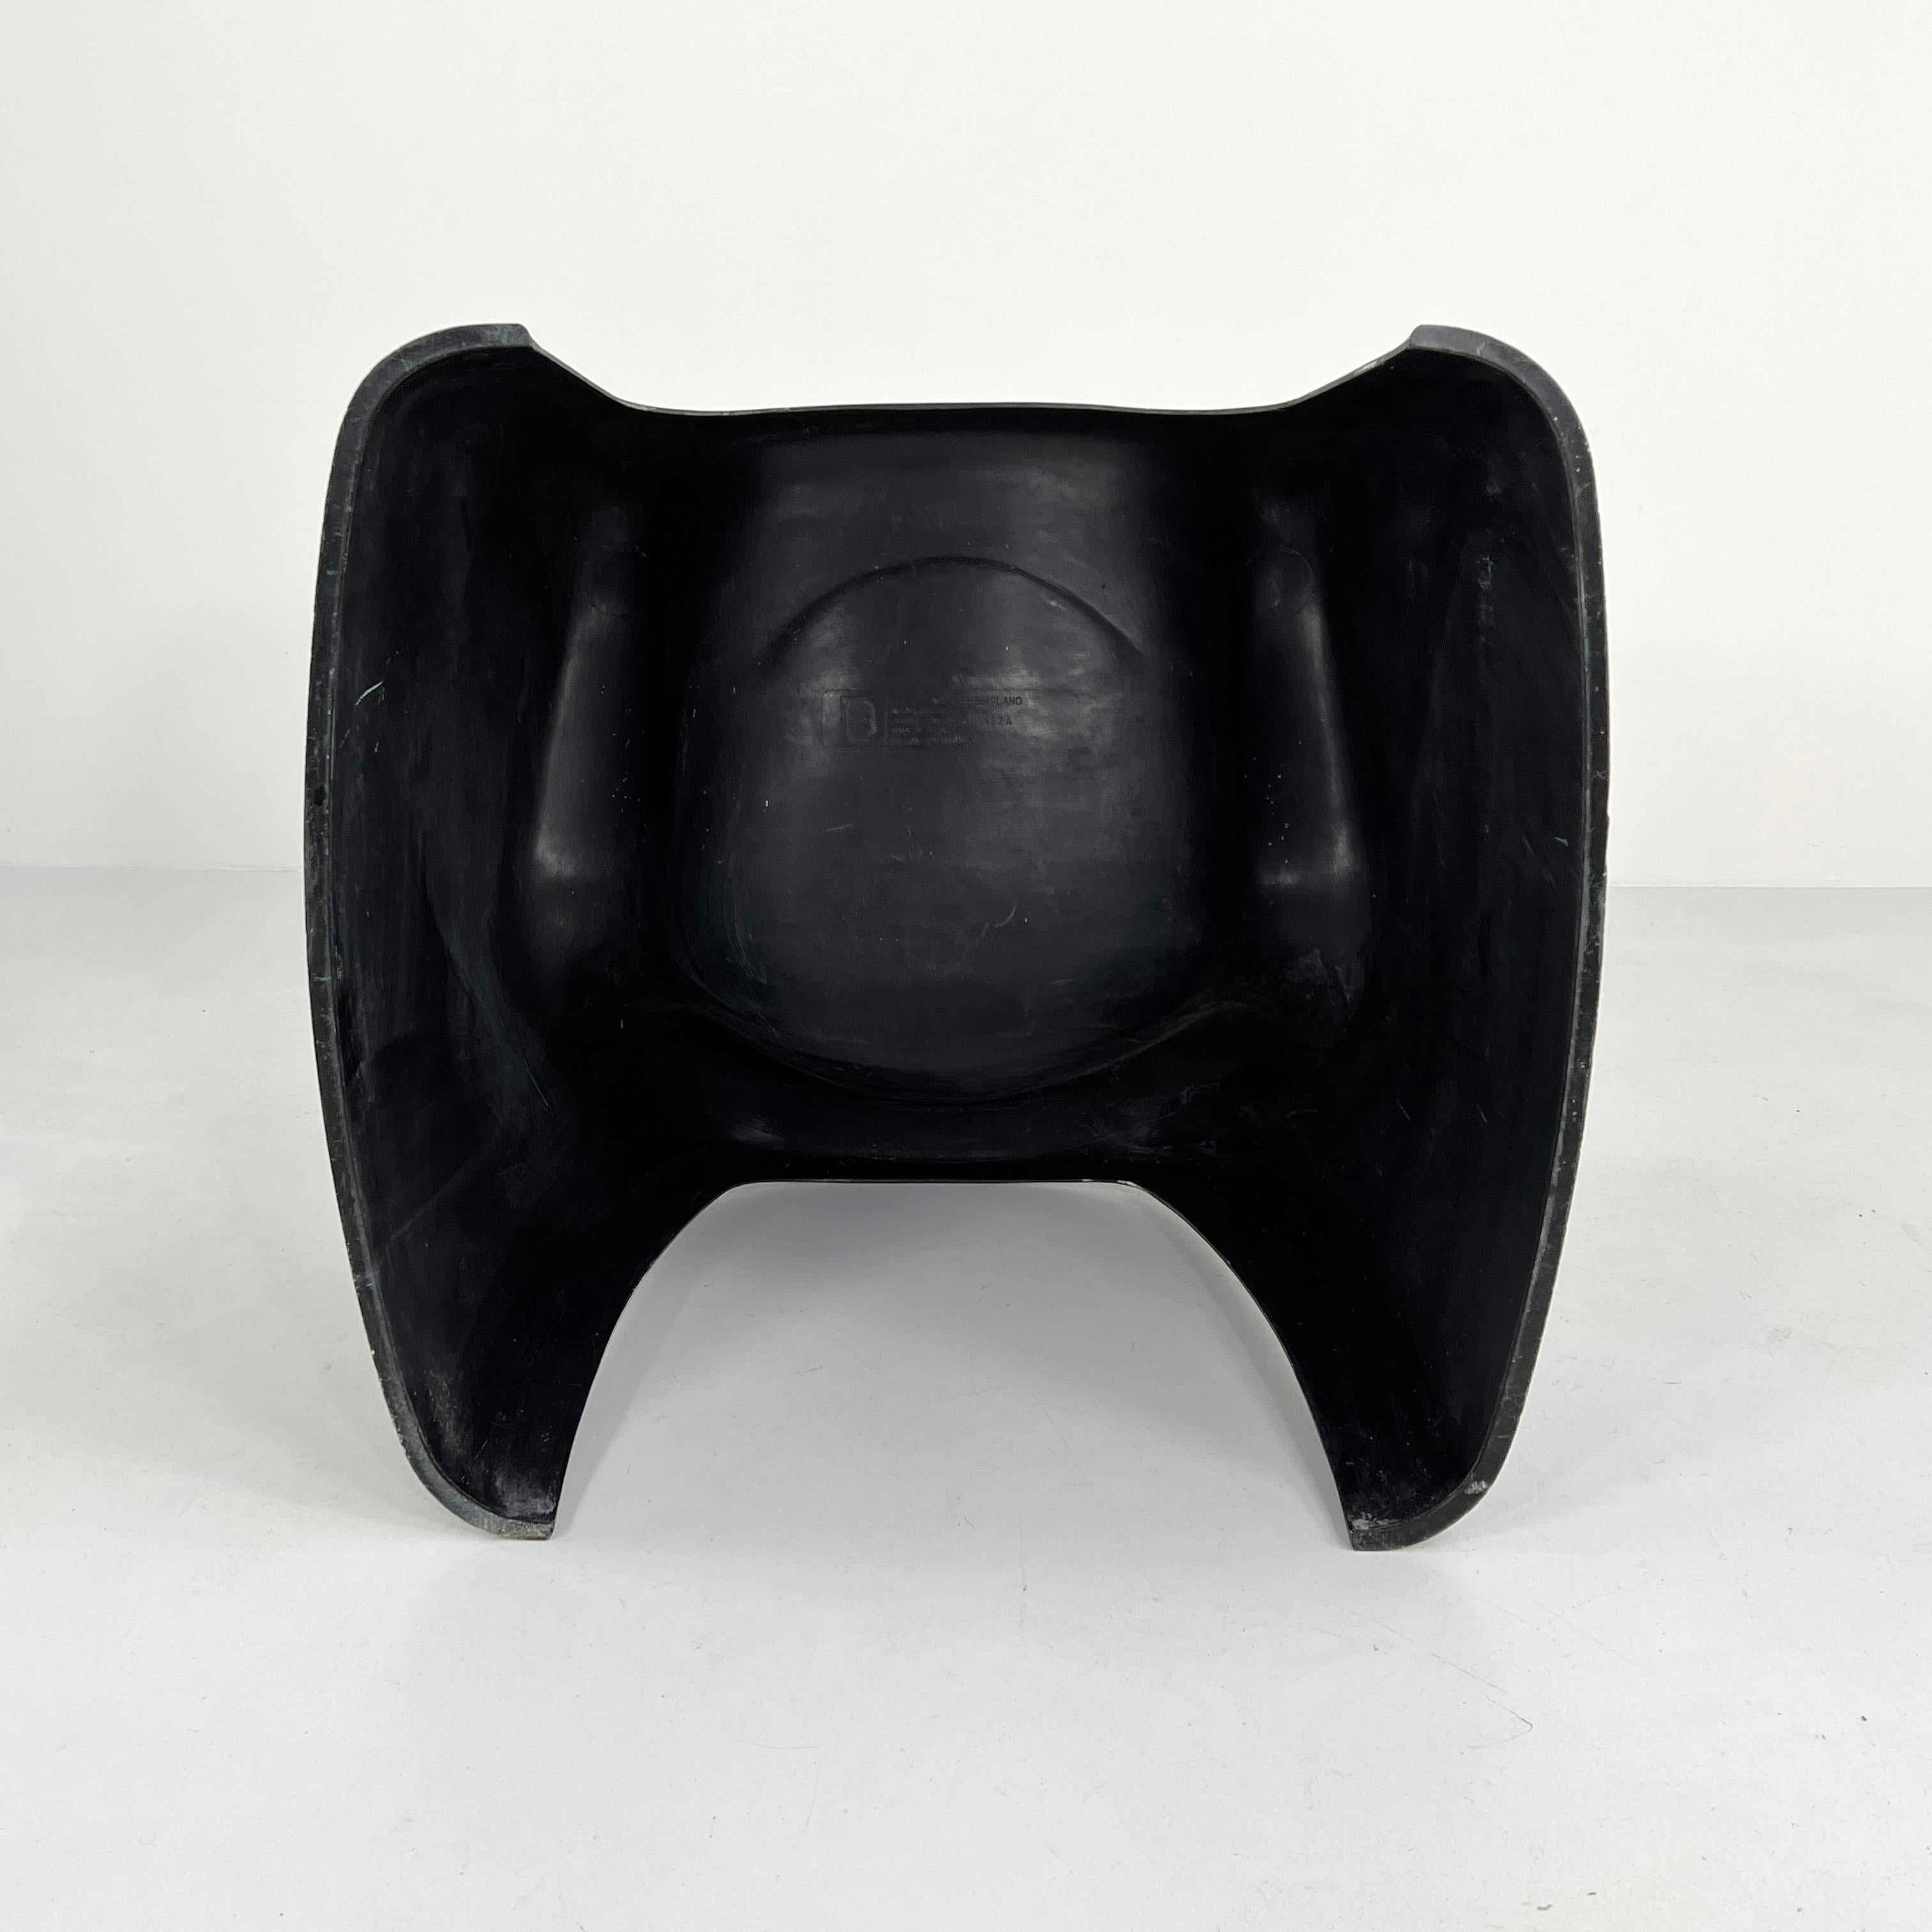 Black Toga Chair by Sergio Mazza for Artemide, 1960s 2